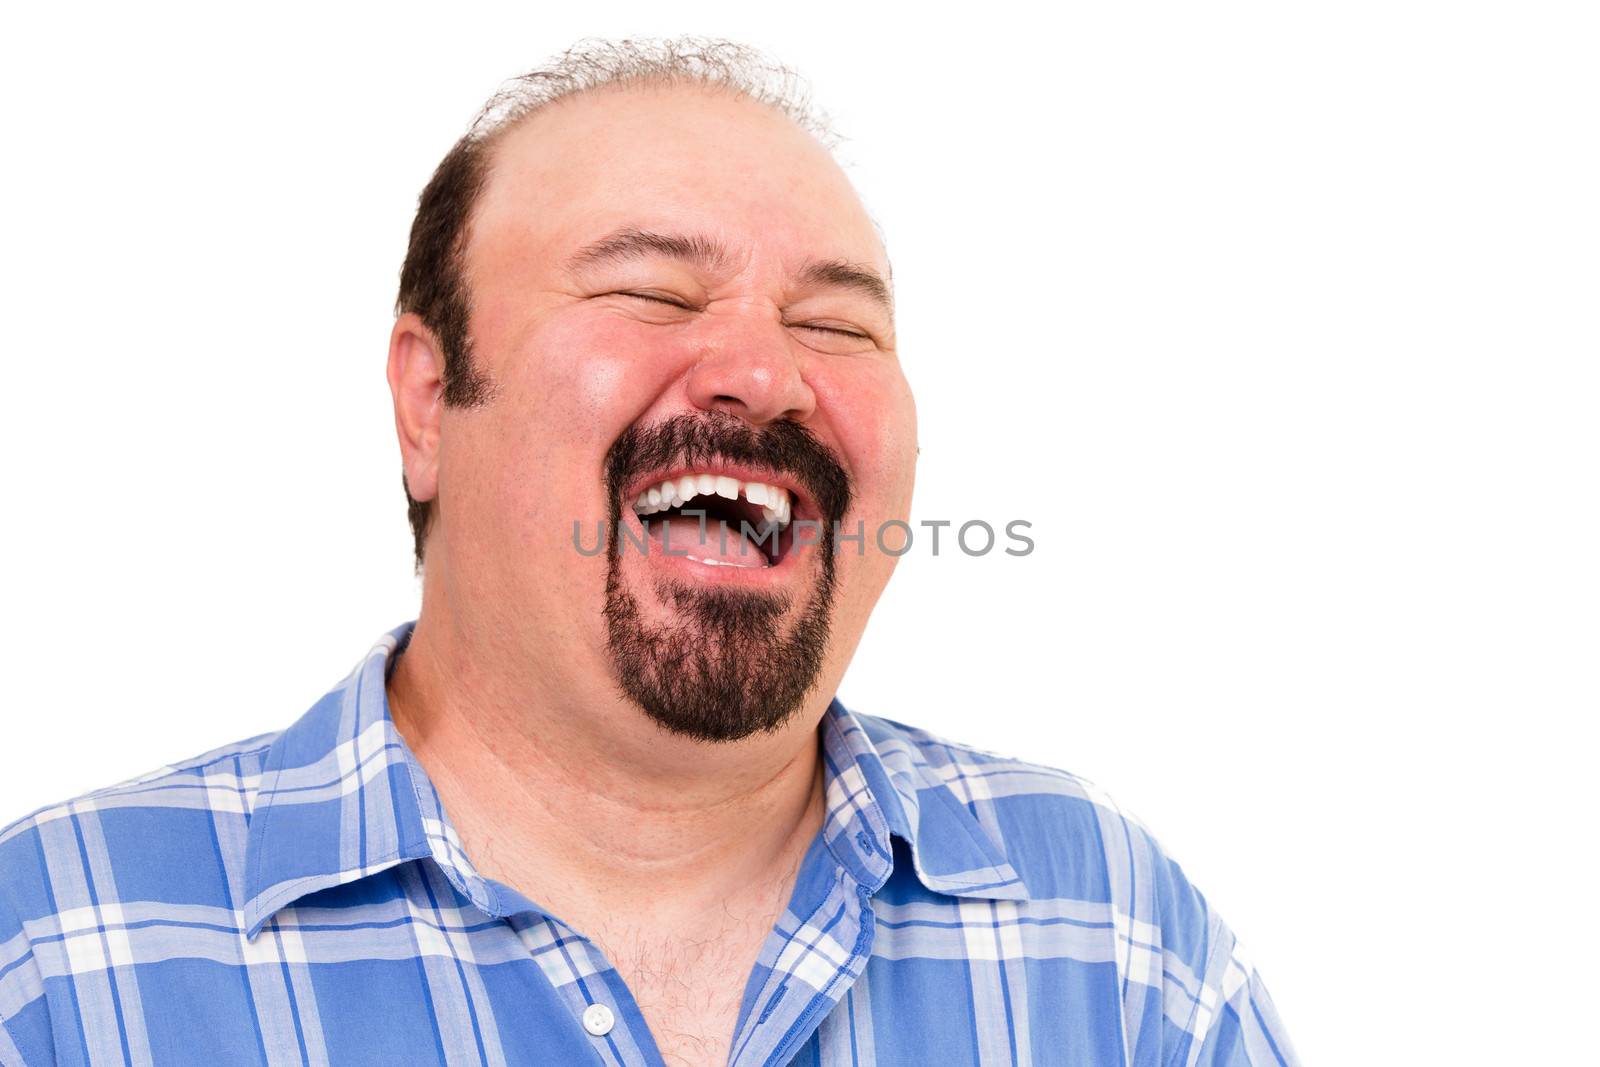 Big man having a hearty laugh of enjoyment and merriment with his head thrown back and eyes closed, isolated on white